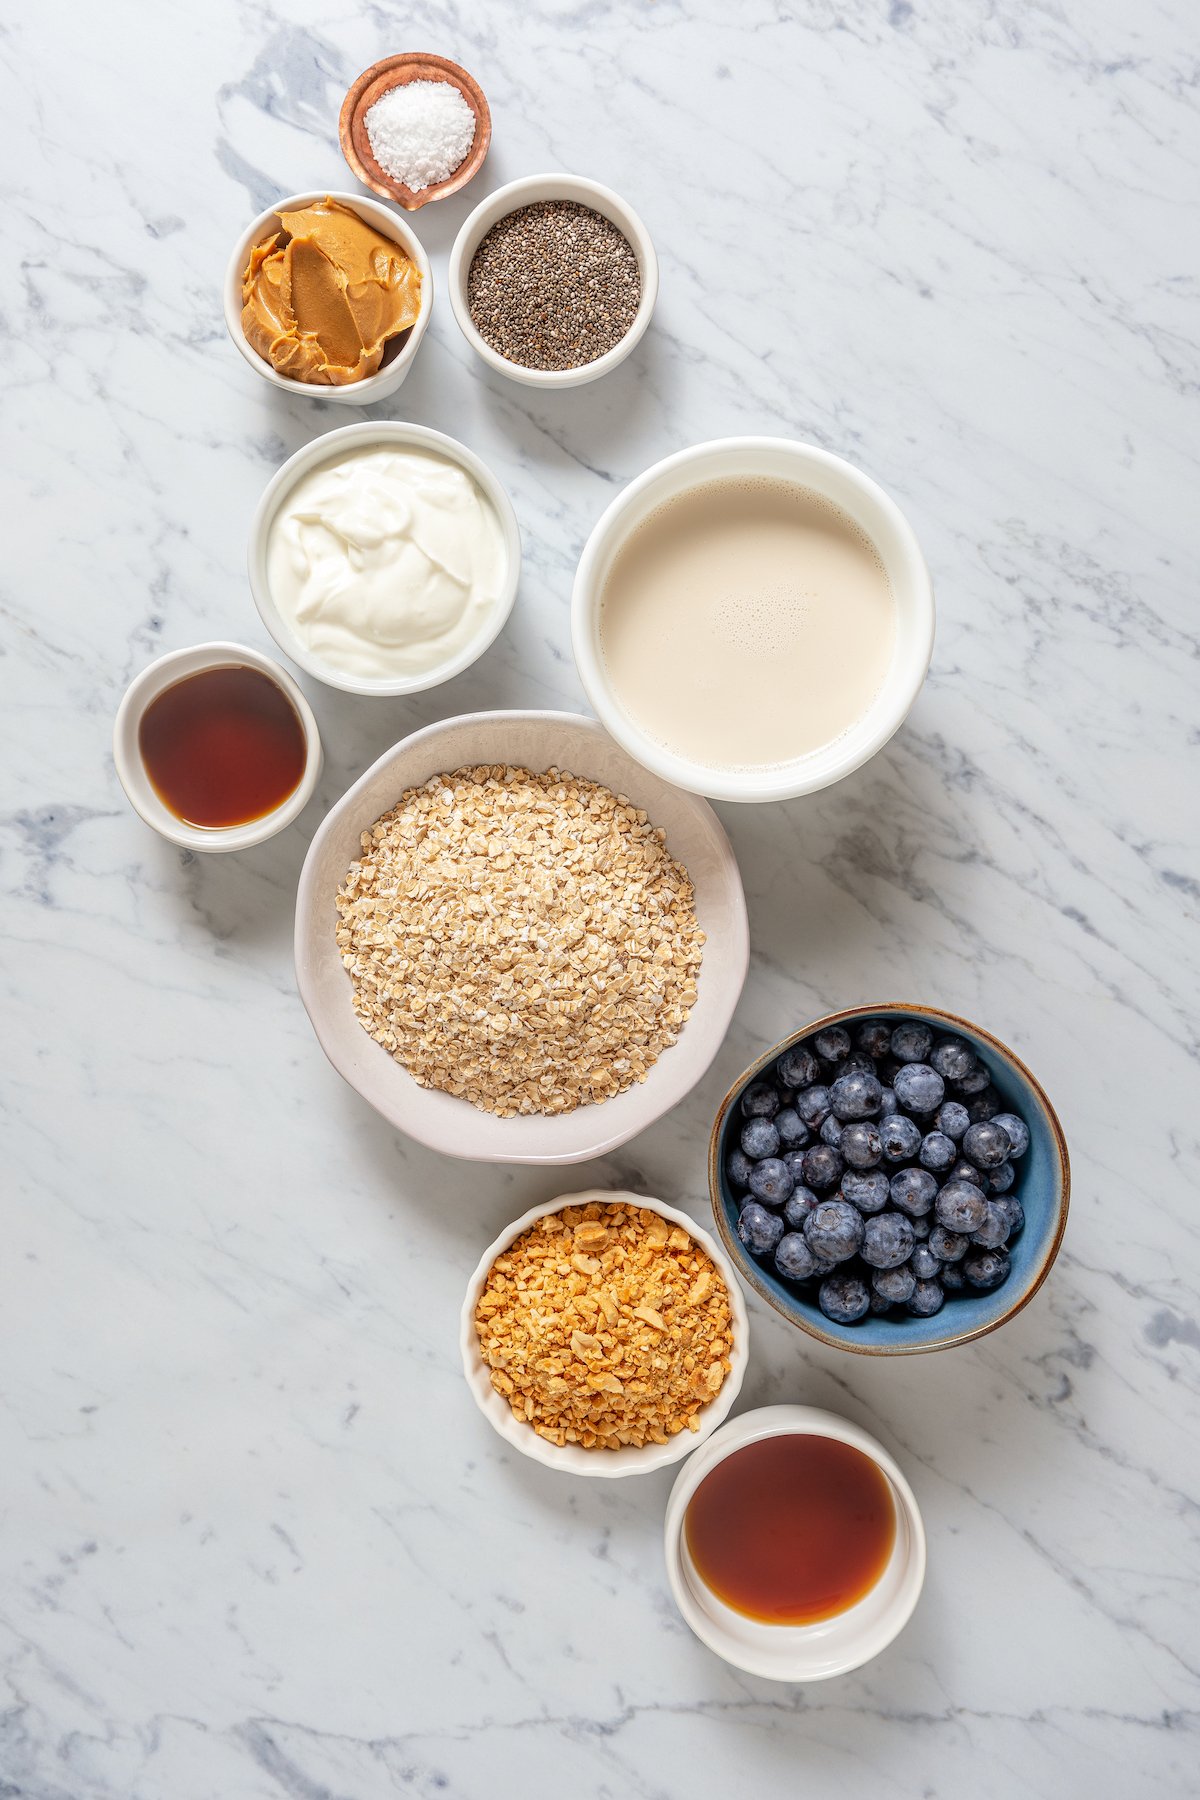 Ingredients for overnight oats, measured and arranged on a work surface.